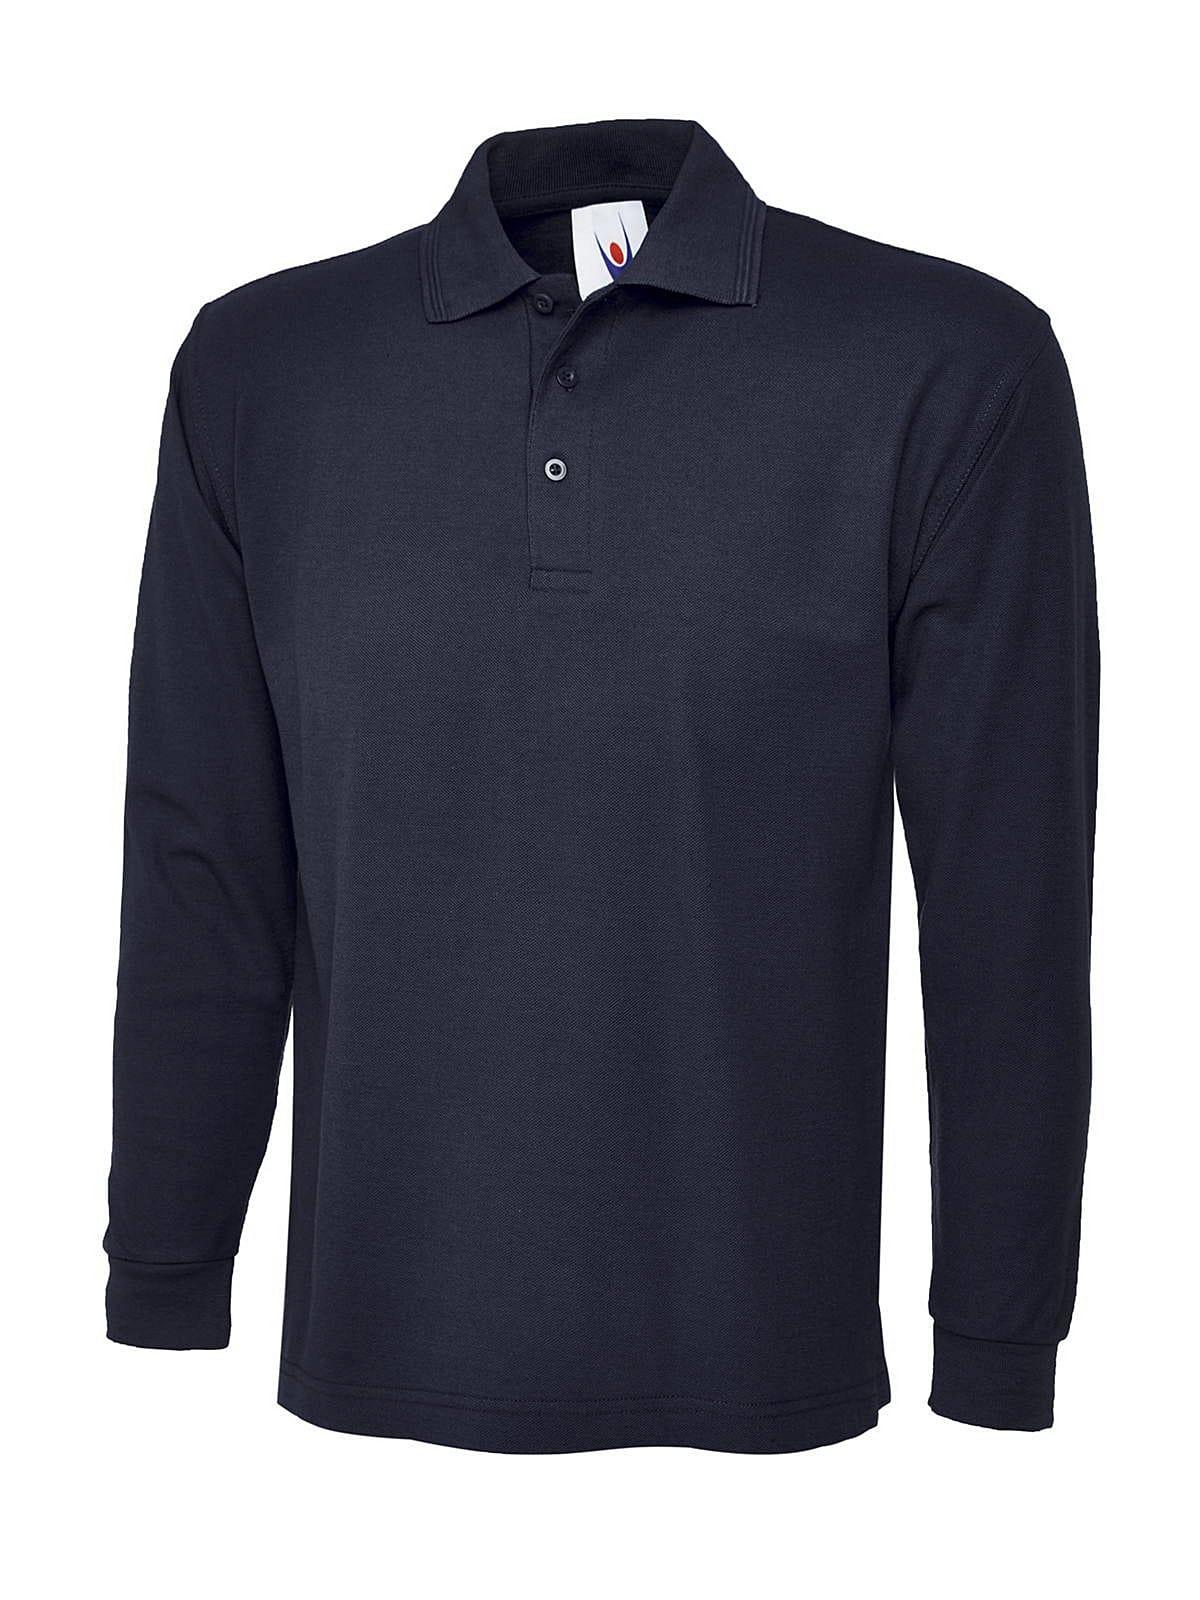 Uneek 220GSM Long-Sleeve Polo Shirt in Navy (Product Code: UC113)